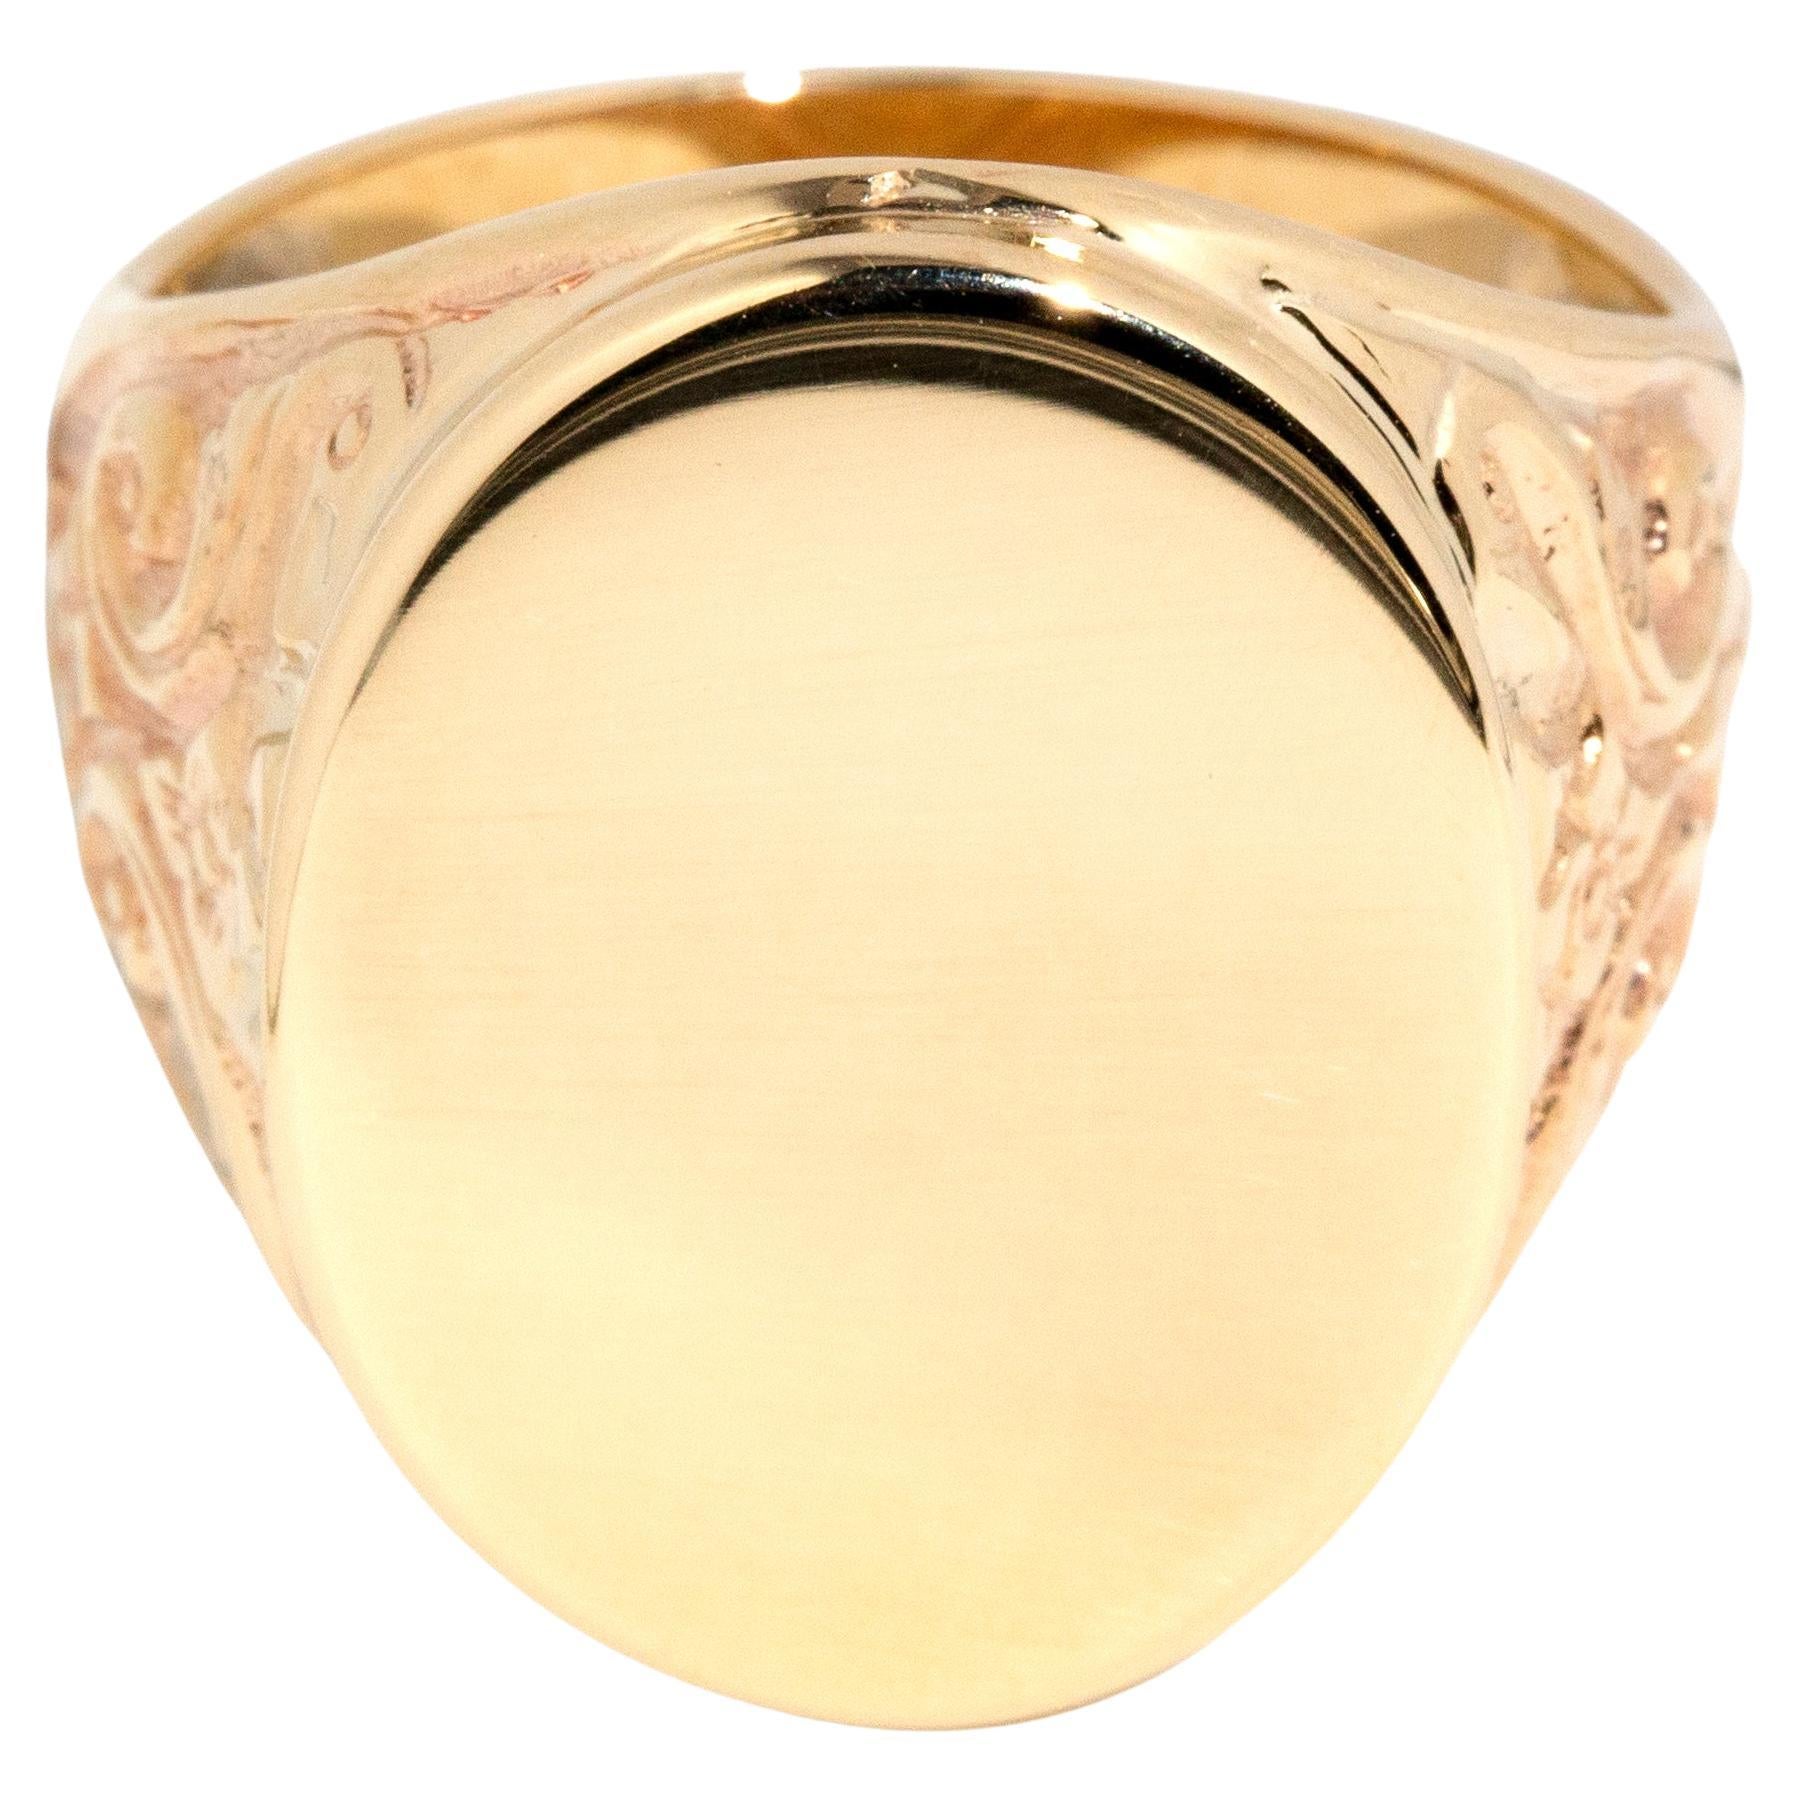 Vintage circa 1970 Or jaune 9 carats Dome Oval Patterned Unisex Signet Ring